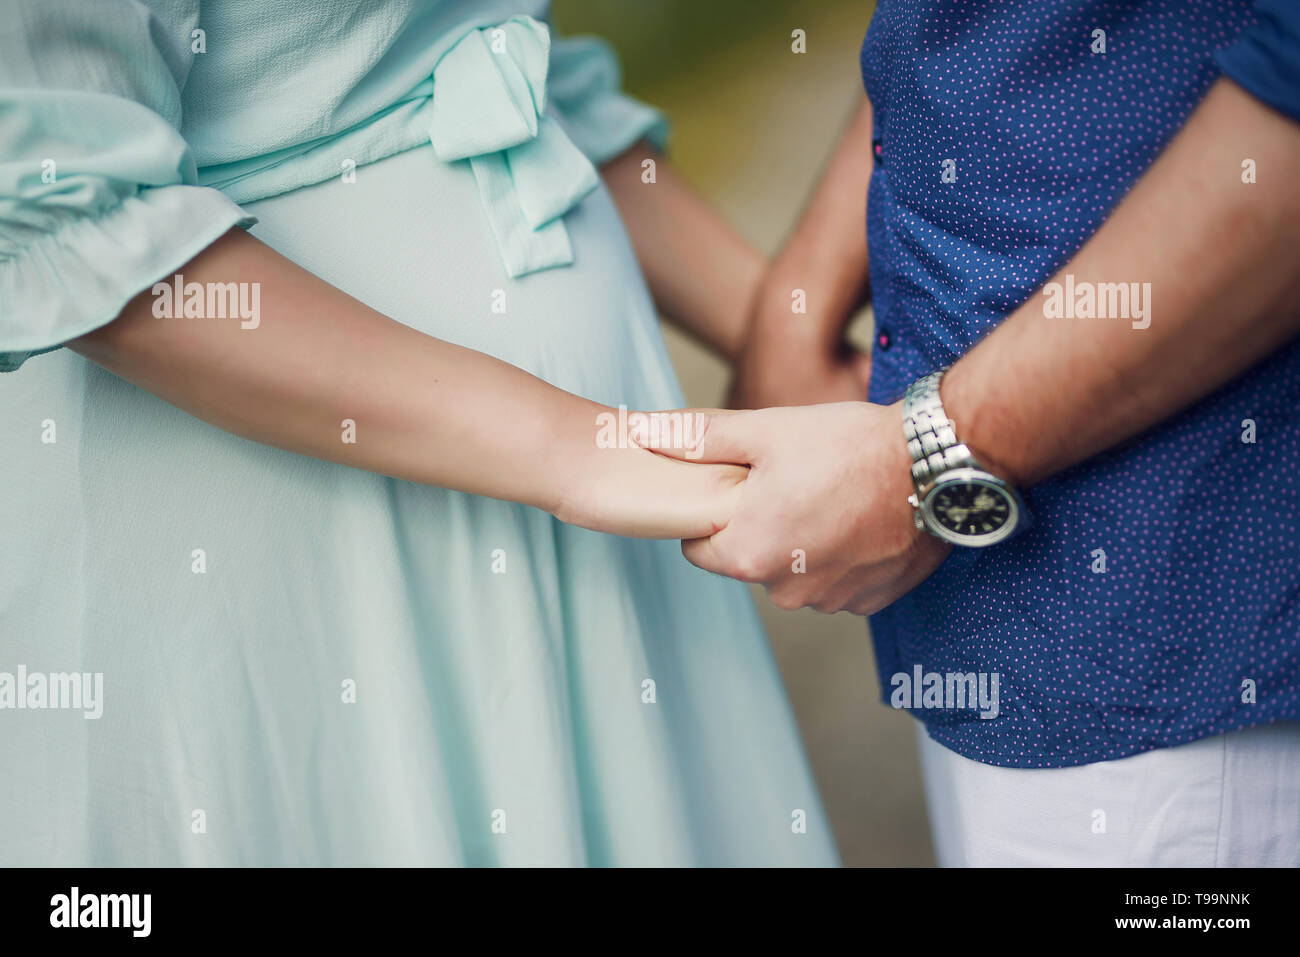 Caucasian couple holding hands with focus on the pregnant woman's beautiful round tummy, concept for happy family expecting a baby, couples pregnancy Stock Photo